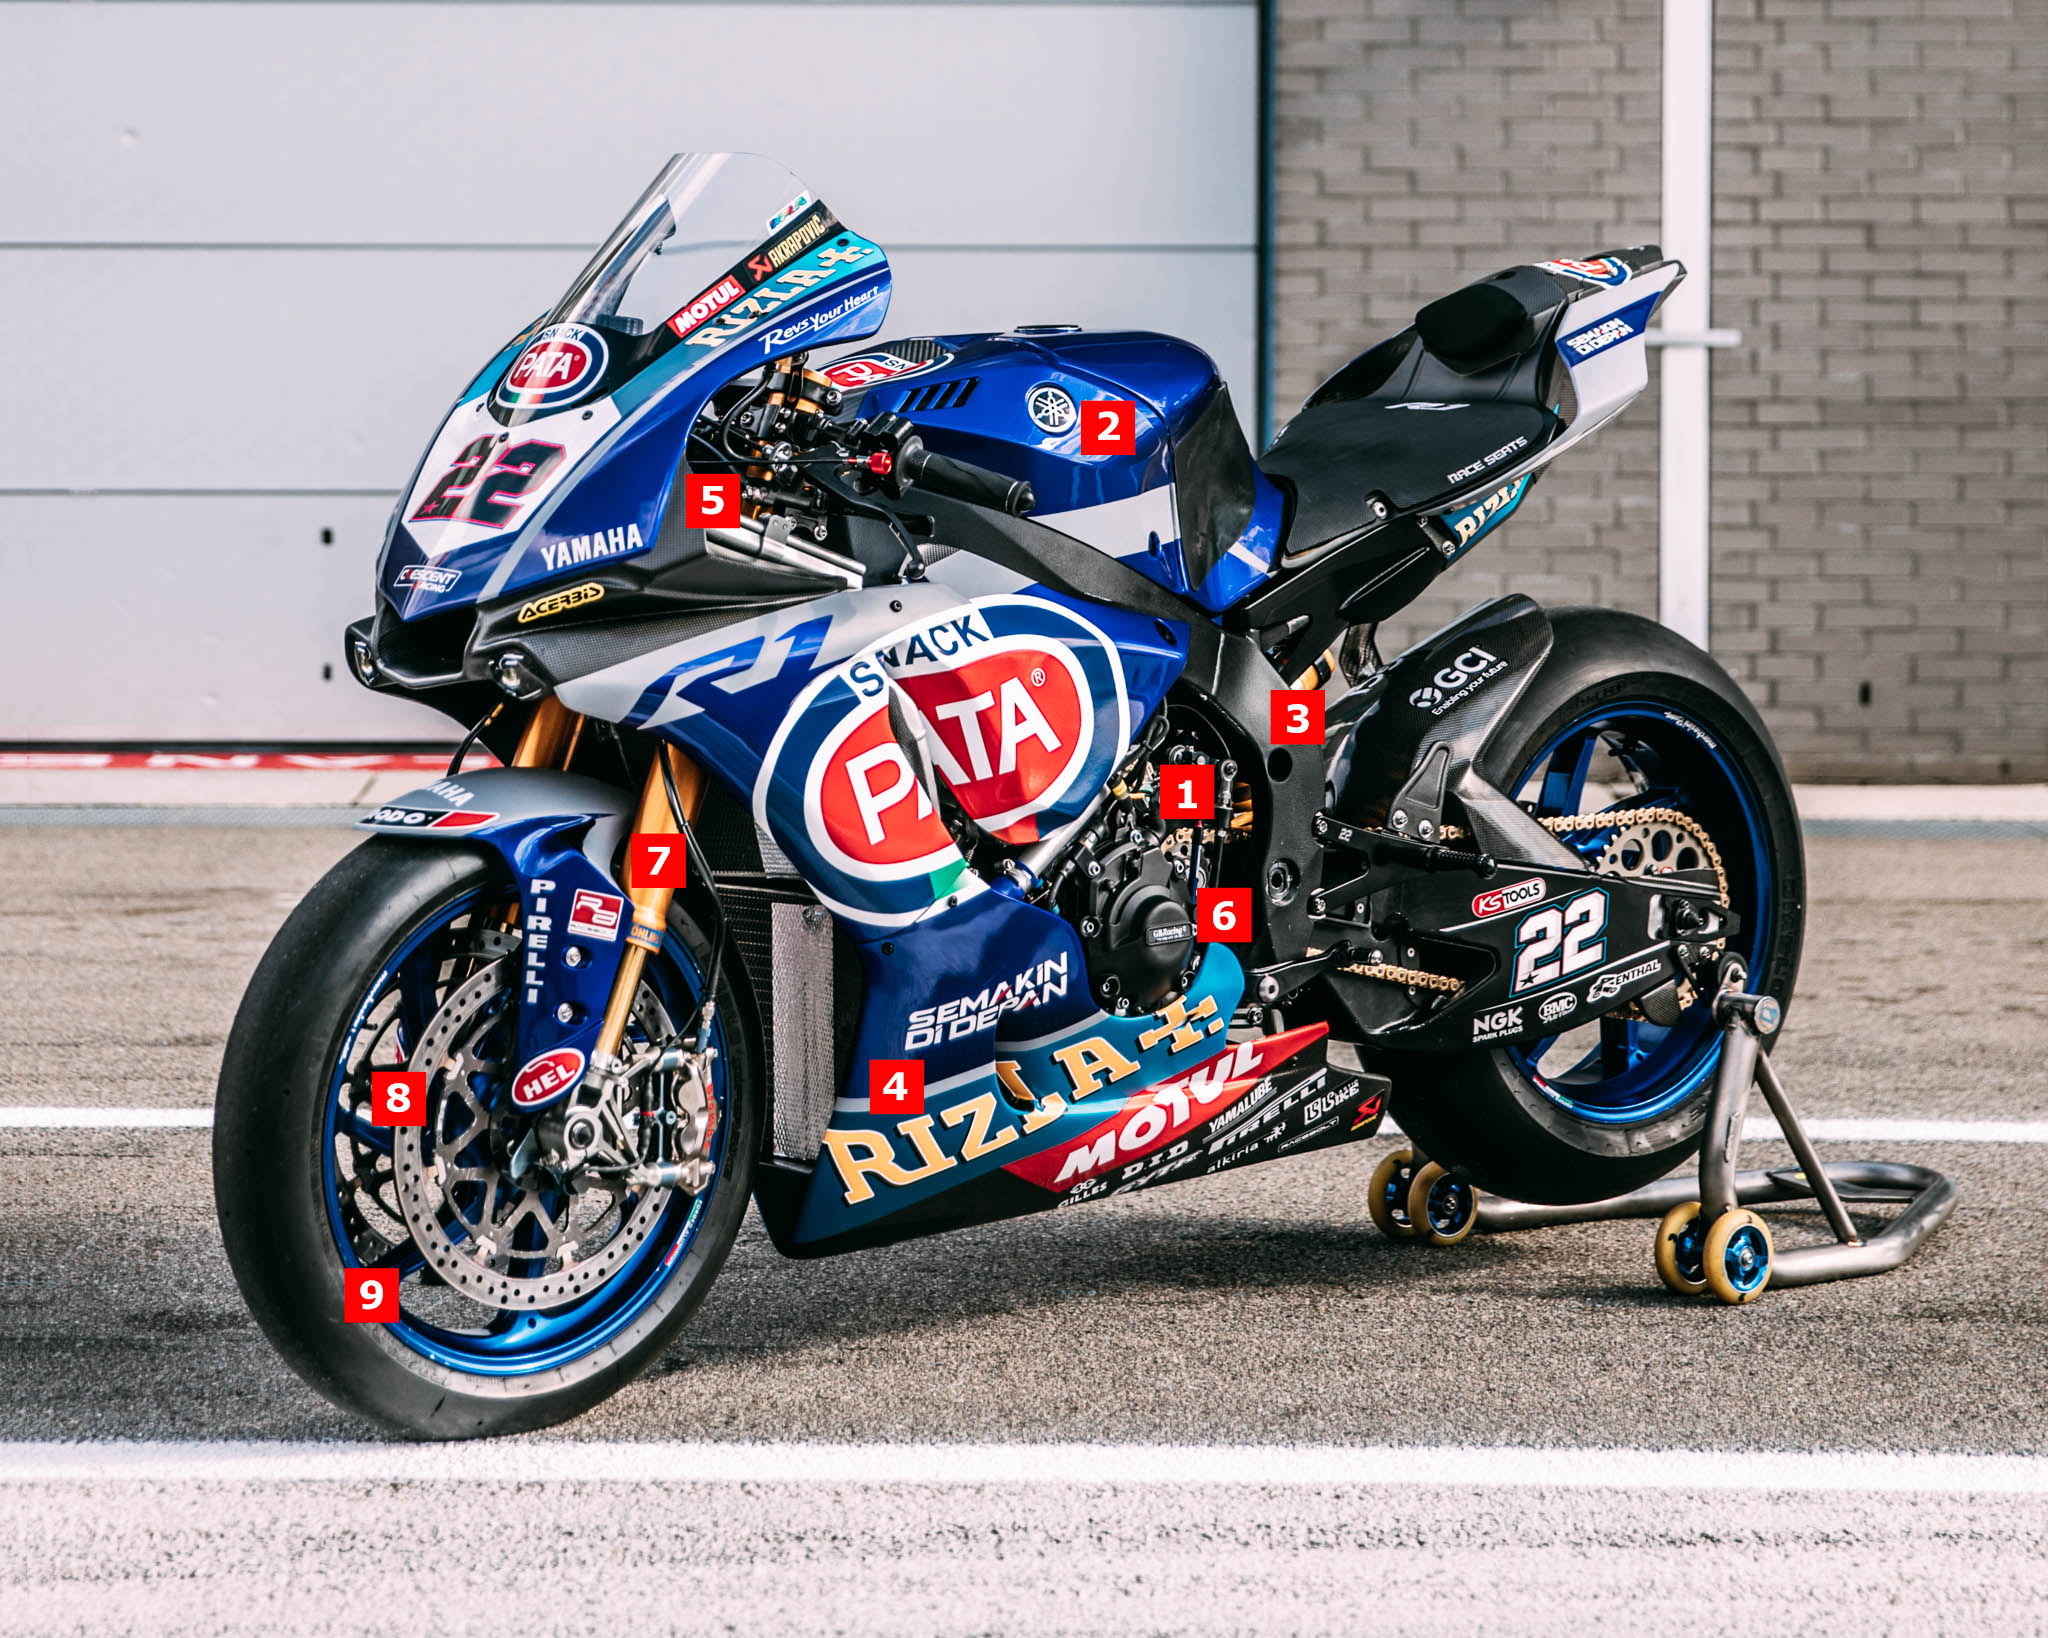 THE ANATOMY OF THE PATA YAMAHY YZF-R1: A CLOSER LOOK INTO THE TECHNICAL